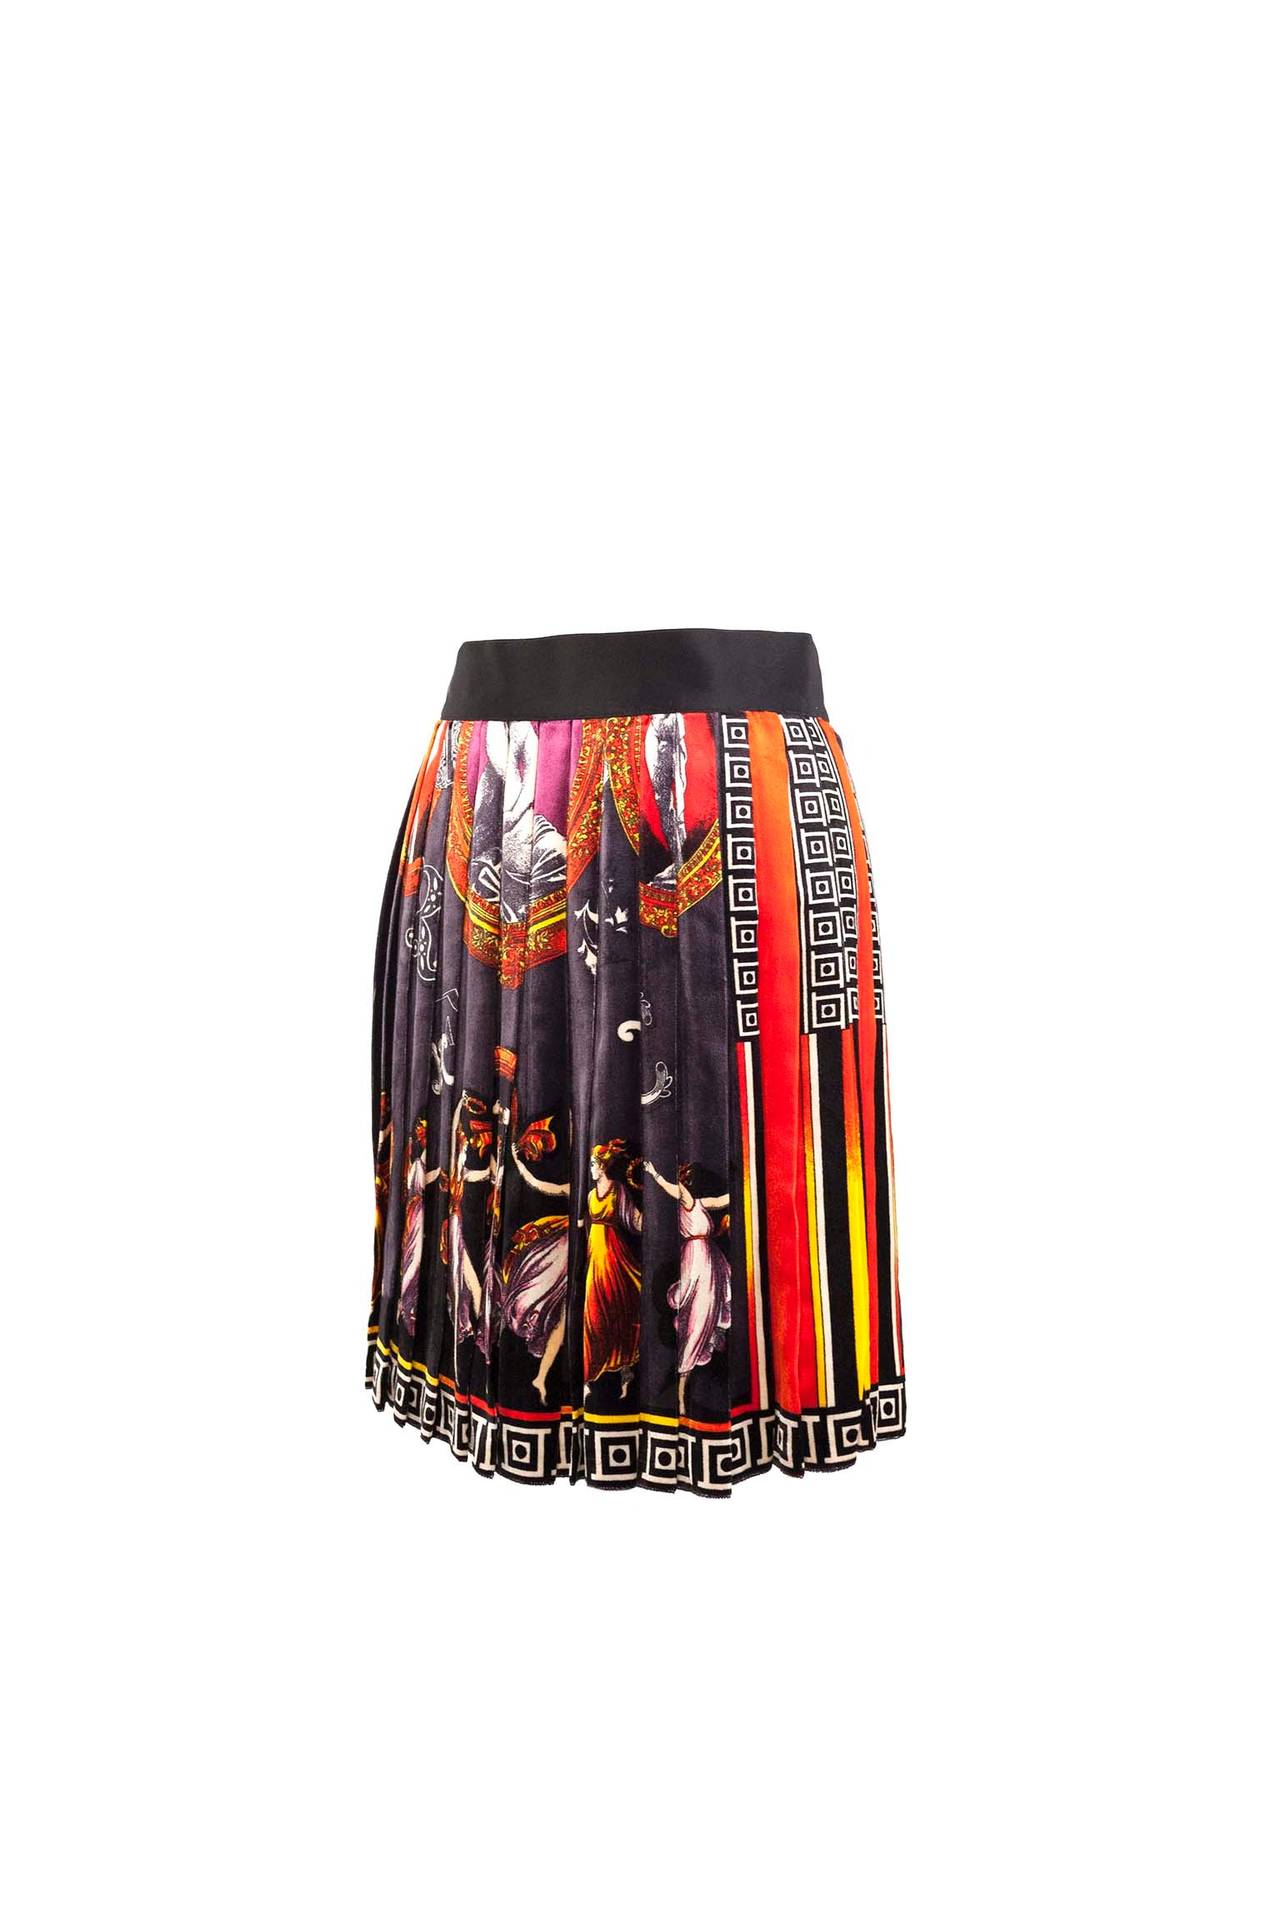 Versace Couture Canova silk velvet print pleated mini skirt. Skirt has the iconic Versace black and white greek key trim with the dancing canova print, knife pleats, printed velvet, side zipper with hook and eyes, and in perfect condition.